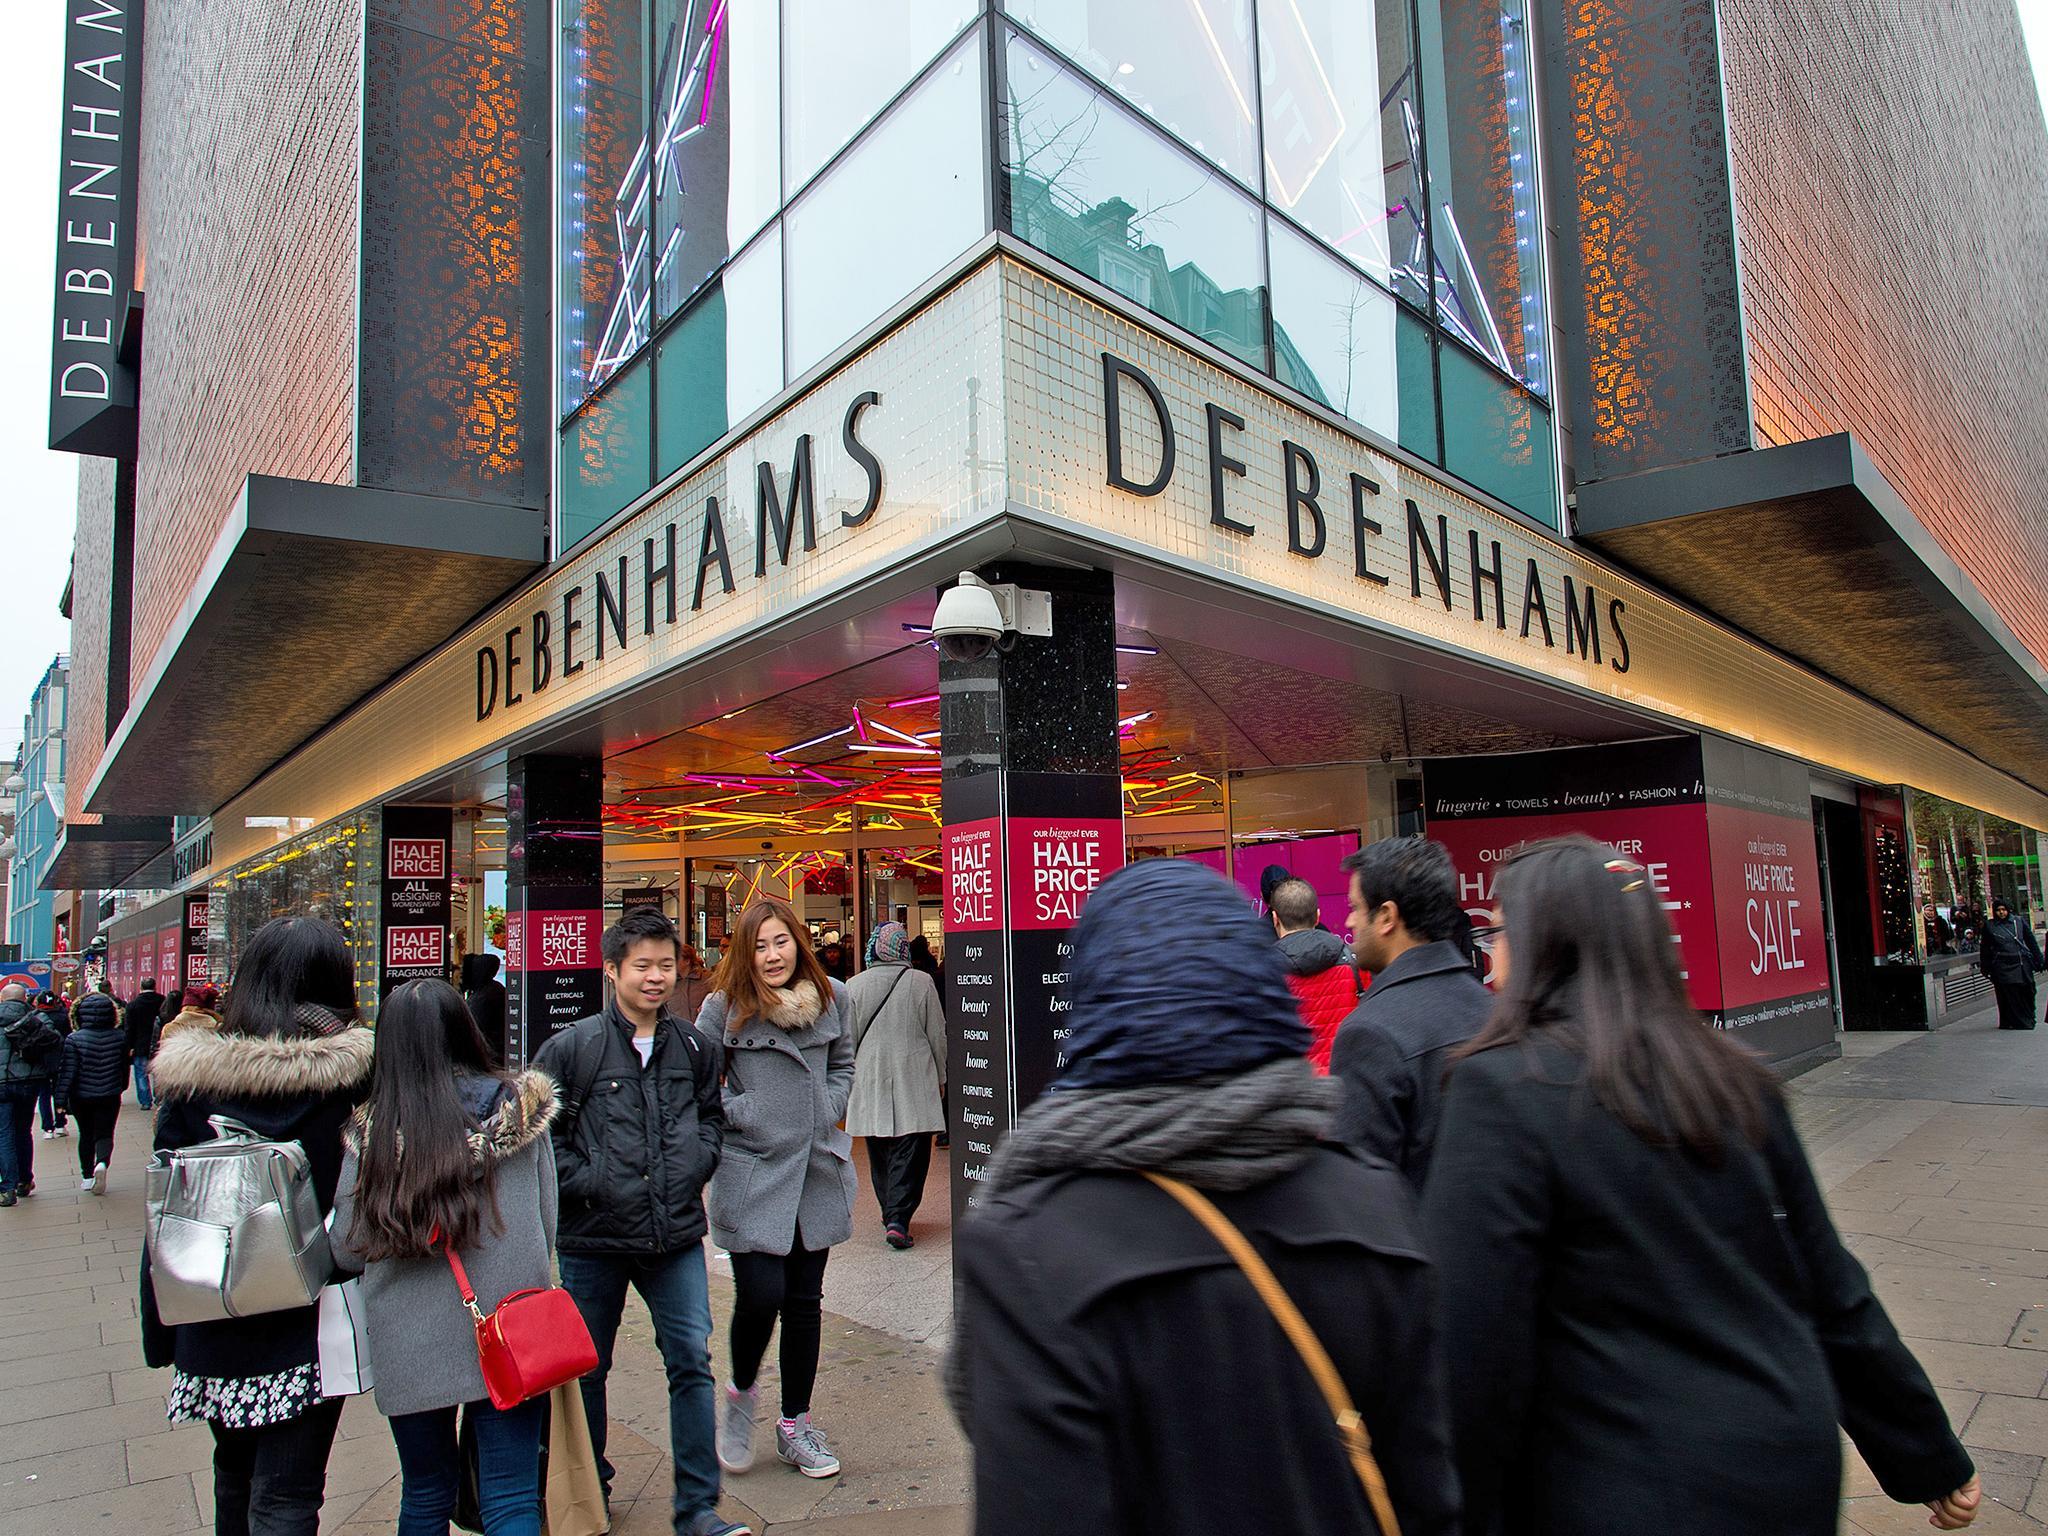 Earlier this year, Debenhams unveiled several new measures to help weather the headwinds caused by the uncertainty around Brexit and the resulting slump in the pound